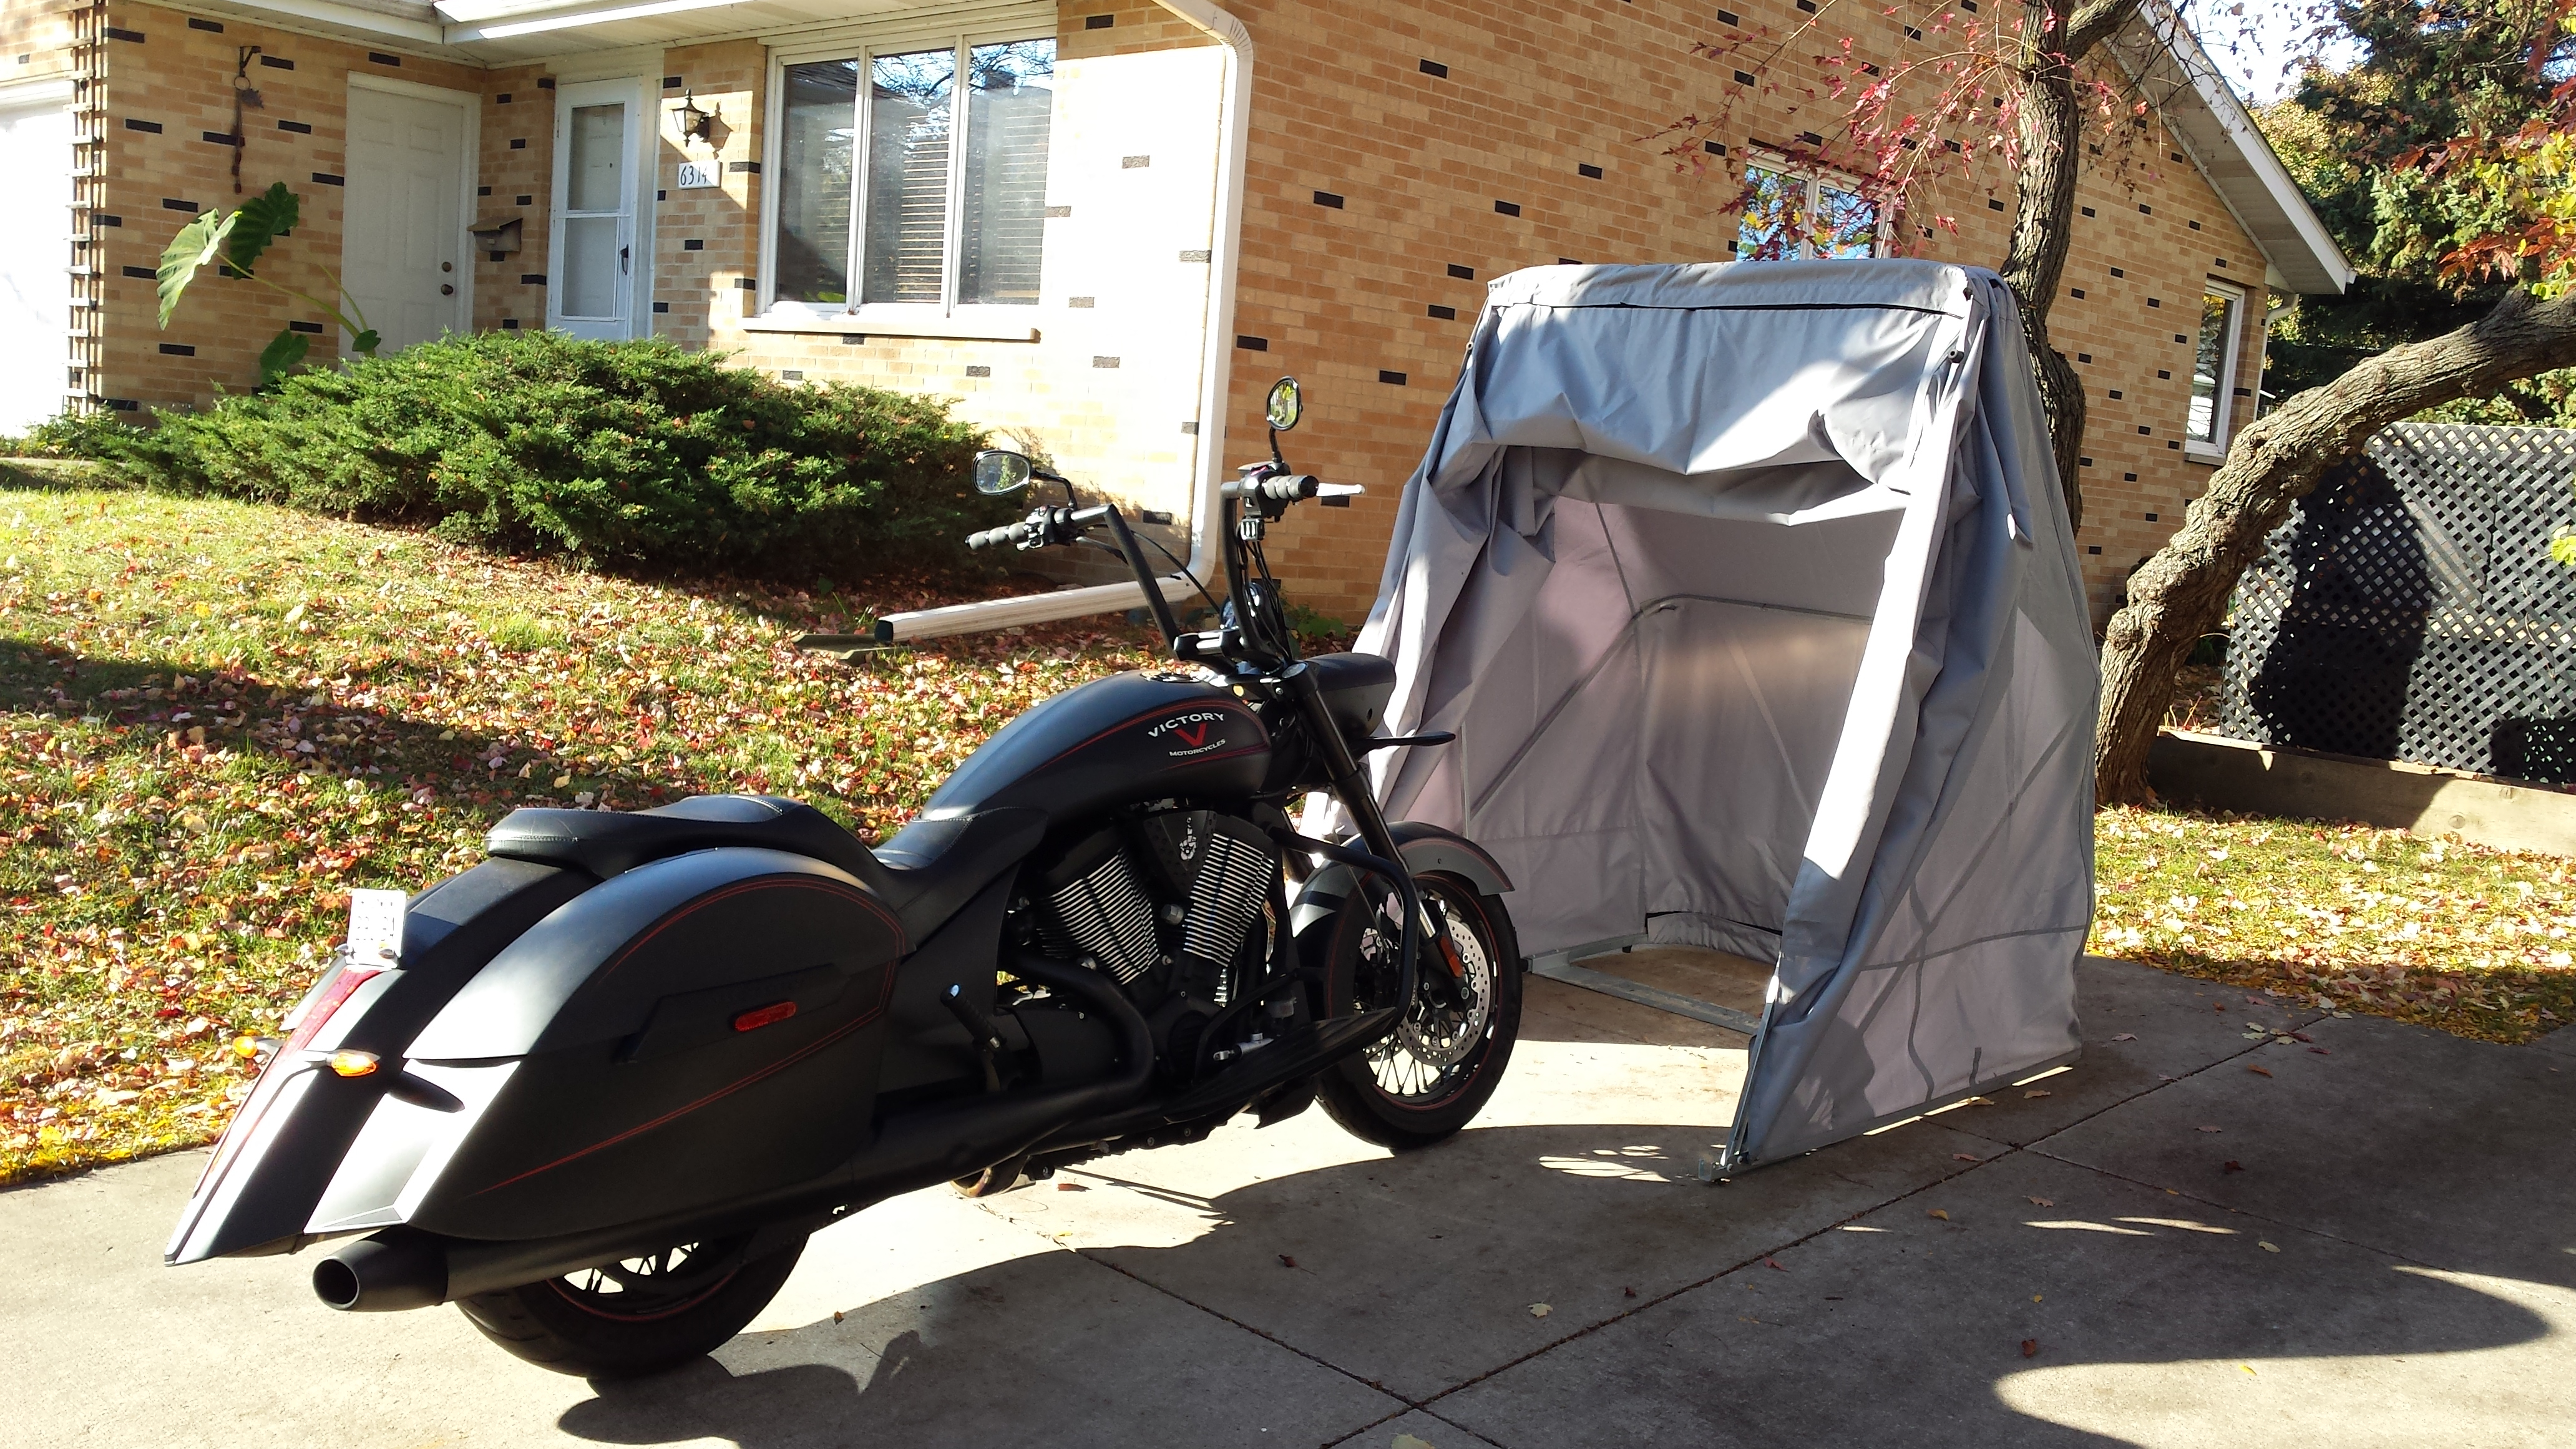 Top 10 Best Motorcycle Storage Shed Of 2019 Reviews Buying Guide for size 4128 X 2322